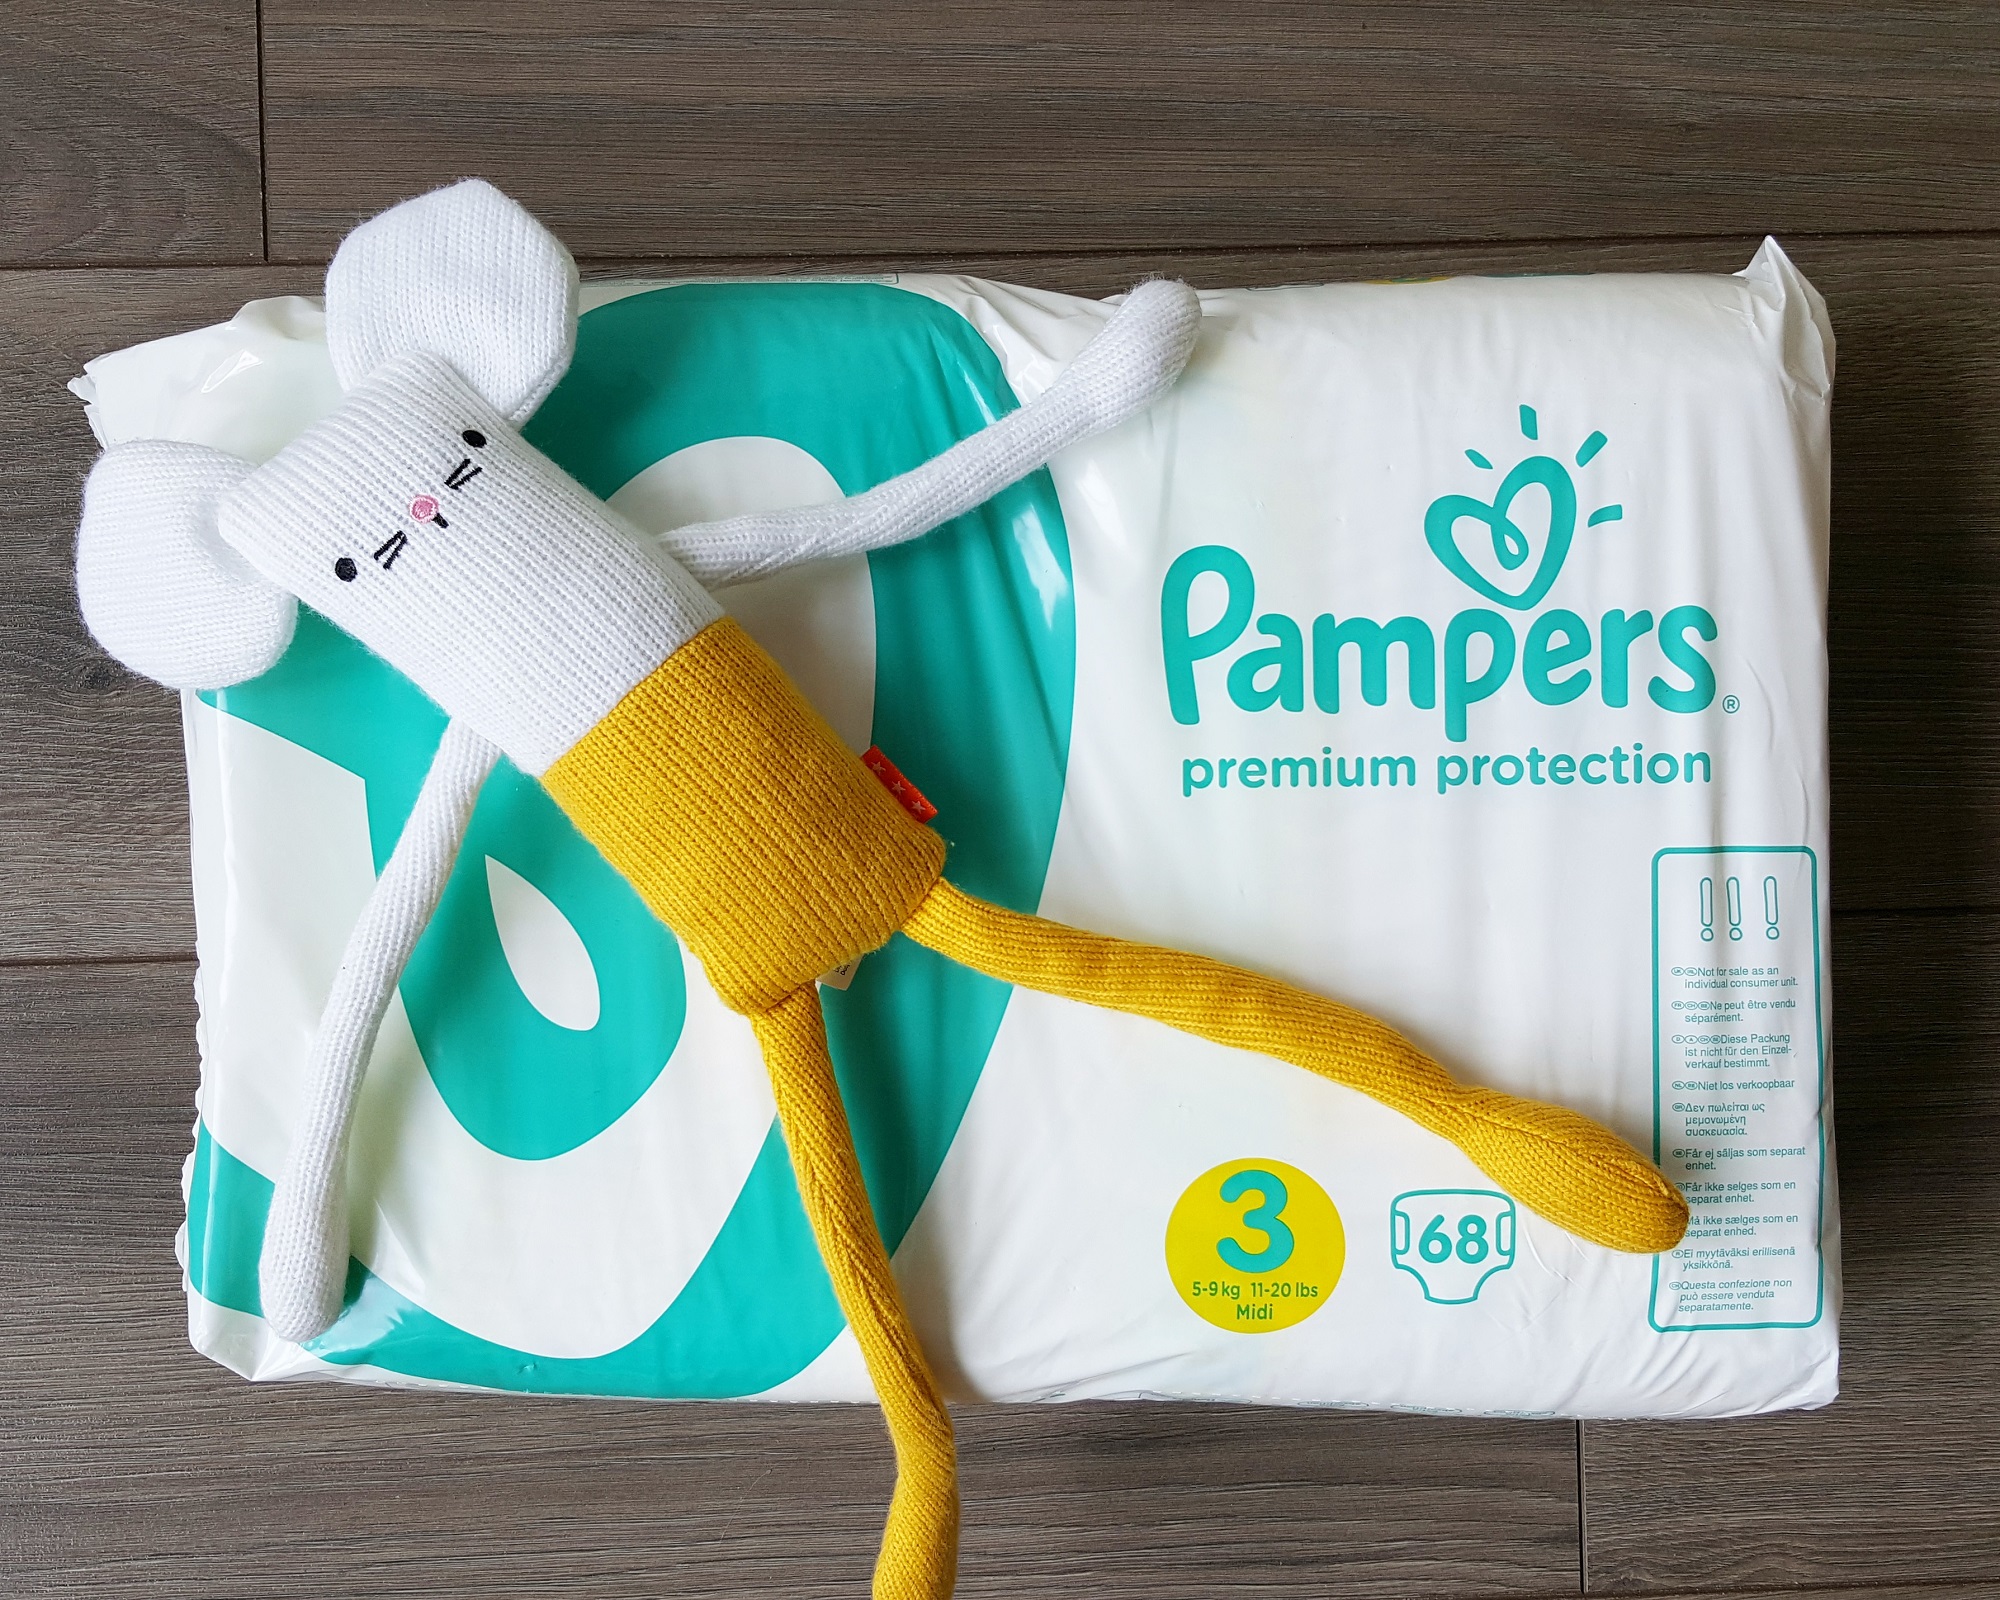 Pampers test